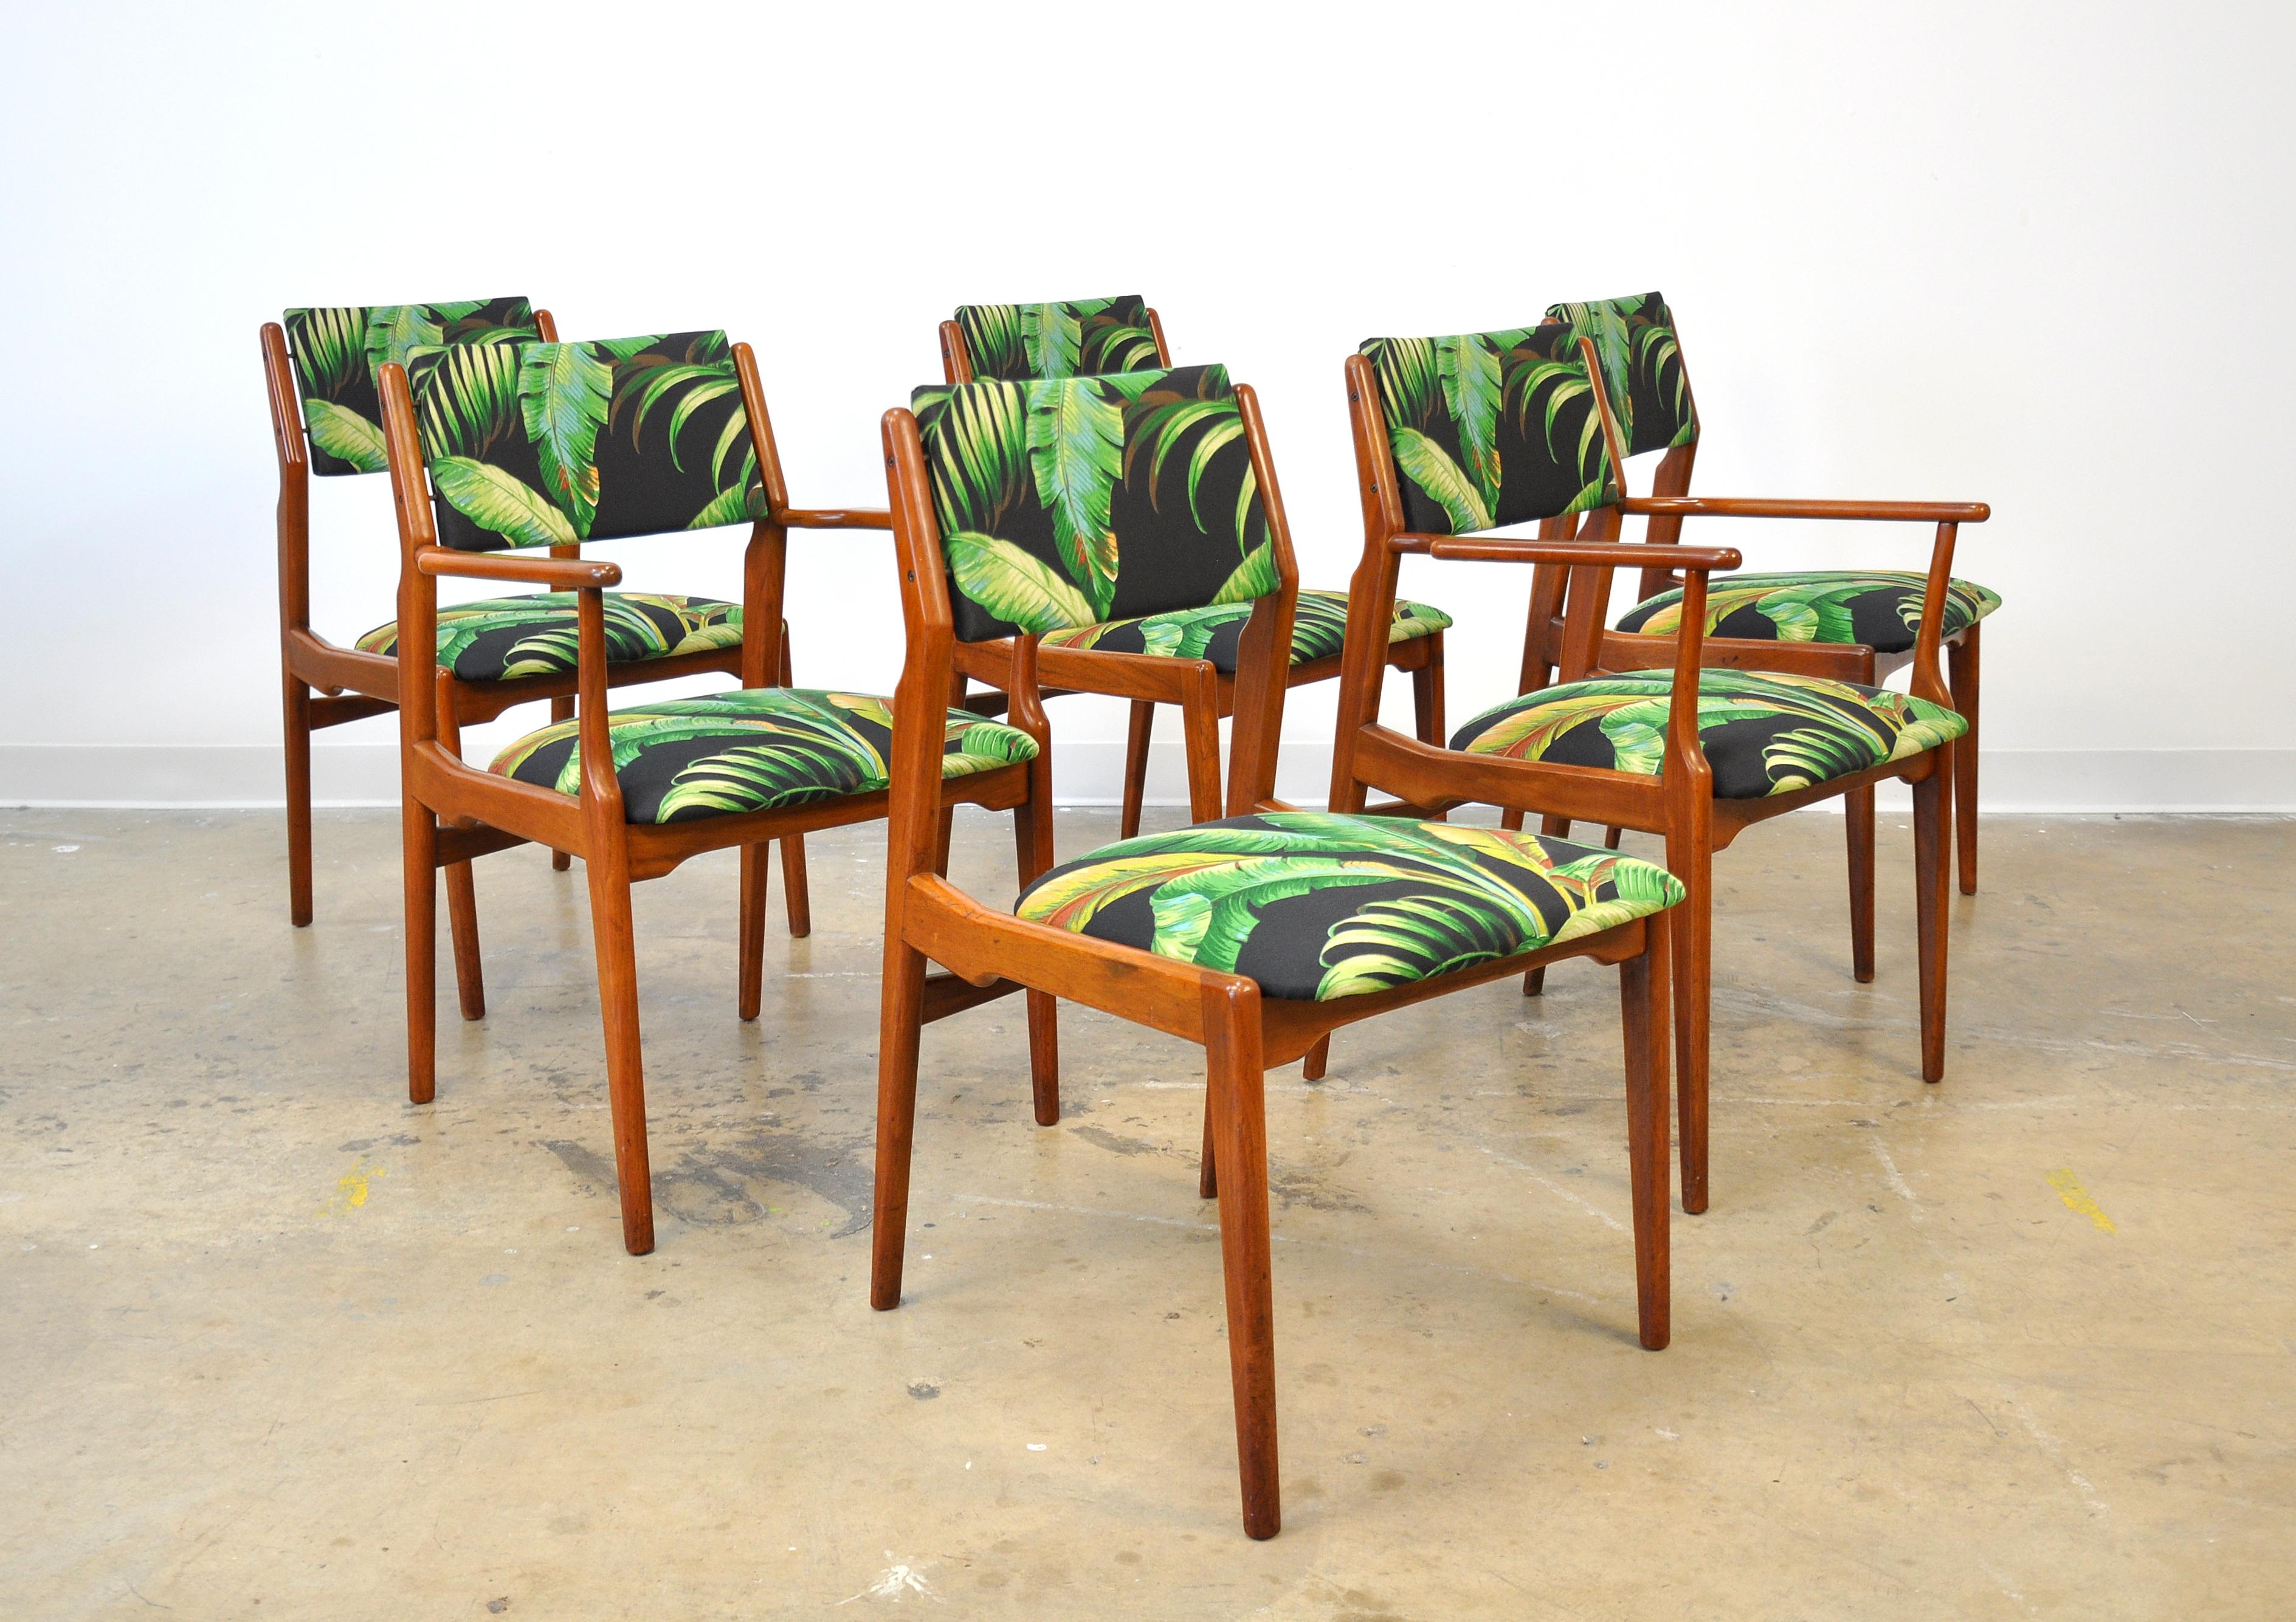 Set of six vintage midcentury dining chairs including four side chairs and a pair of armchairs or captain's chairs, dating from the 1960s. The sculpted solid teak frames feature upholstered floating backrests with brass connectors. The seats and